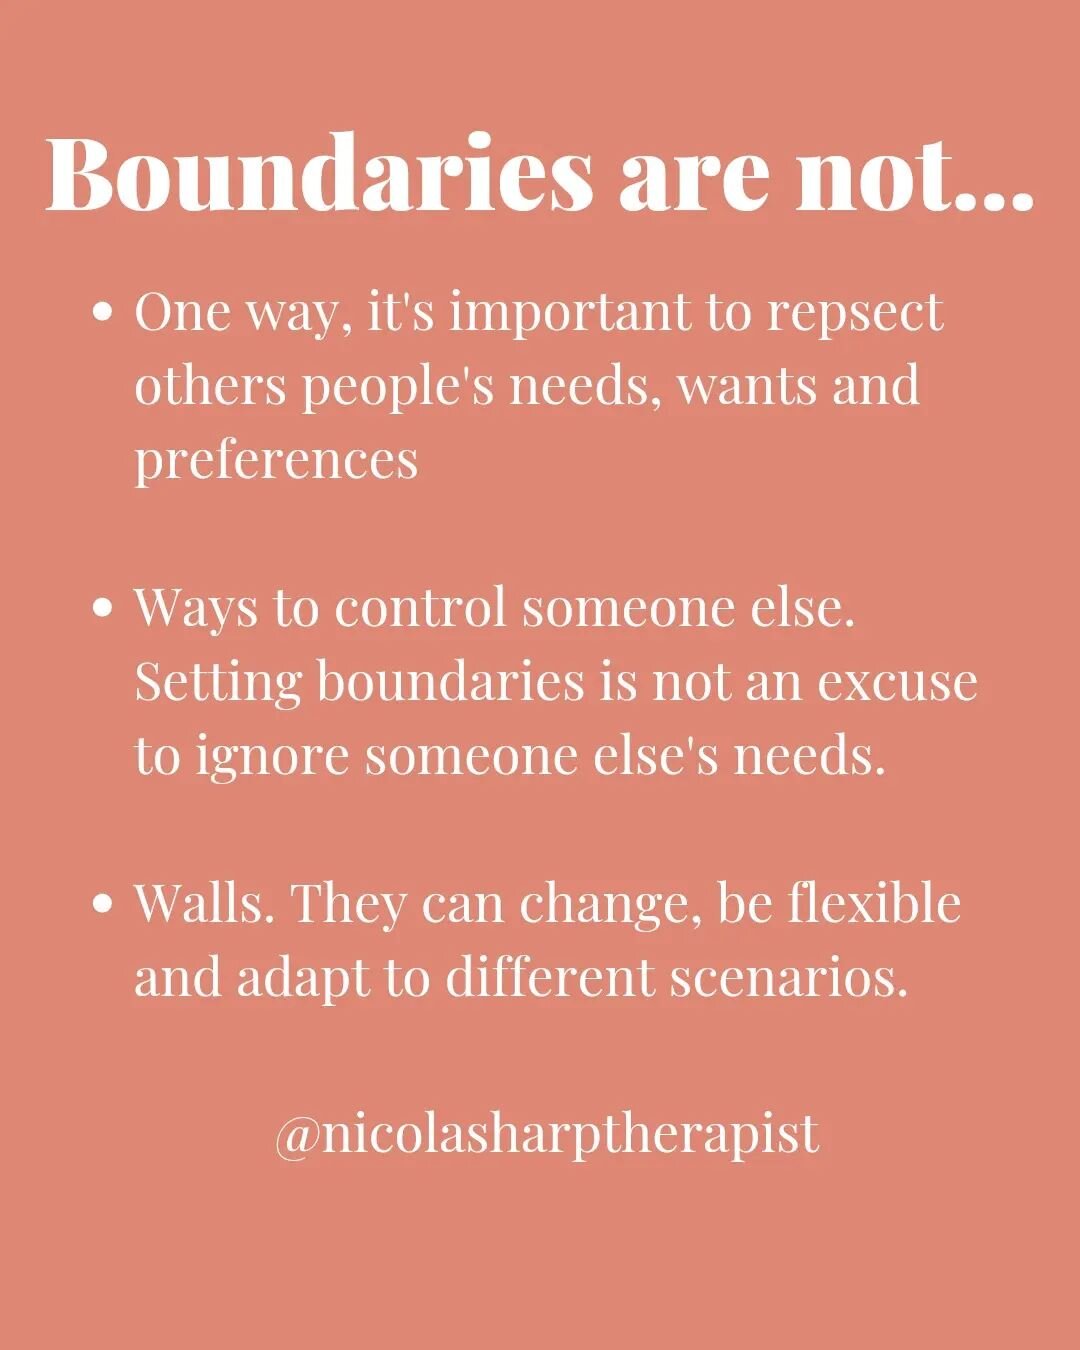 Boundaries are limits that we ultimately set with ourself about what is ok and not ok, and discern what is important to us. They don't always have to be communicated, but can be set internally. Of course we may need to communicate them to others to h